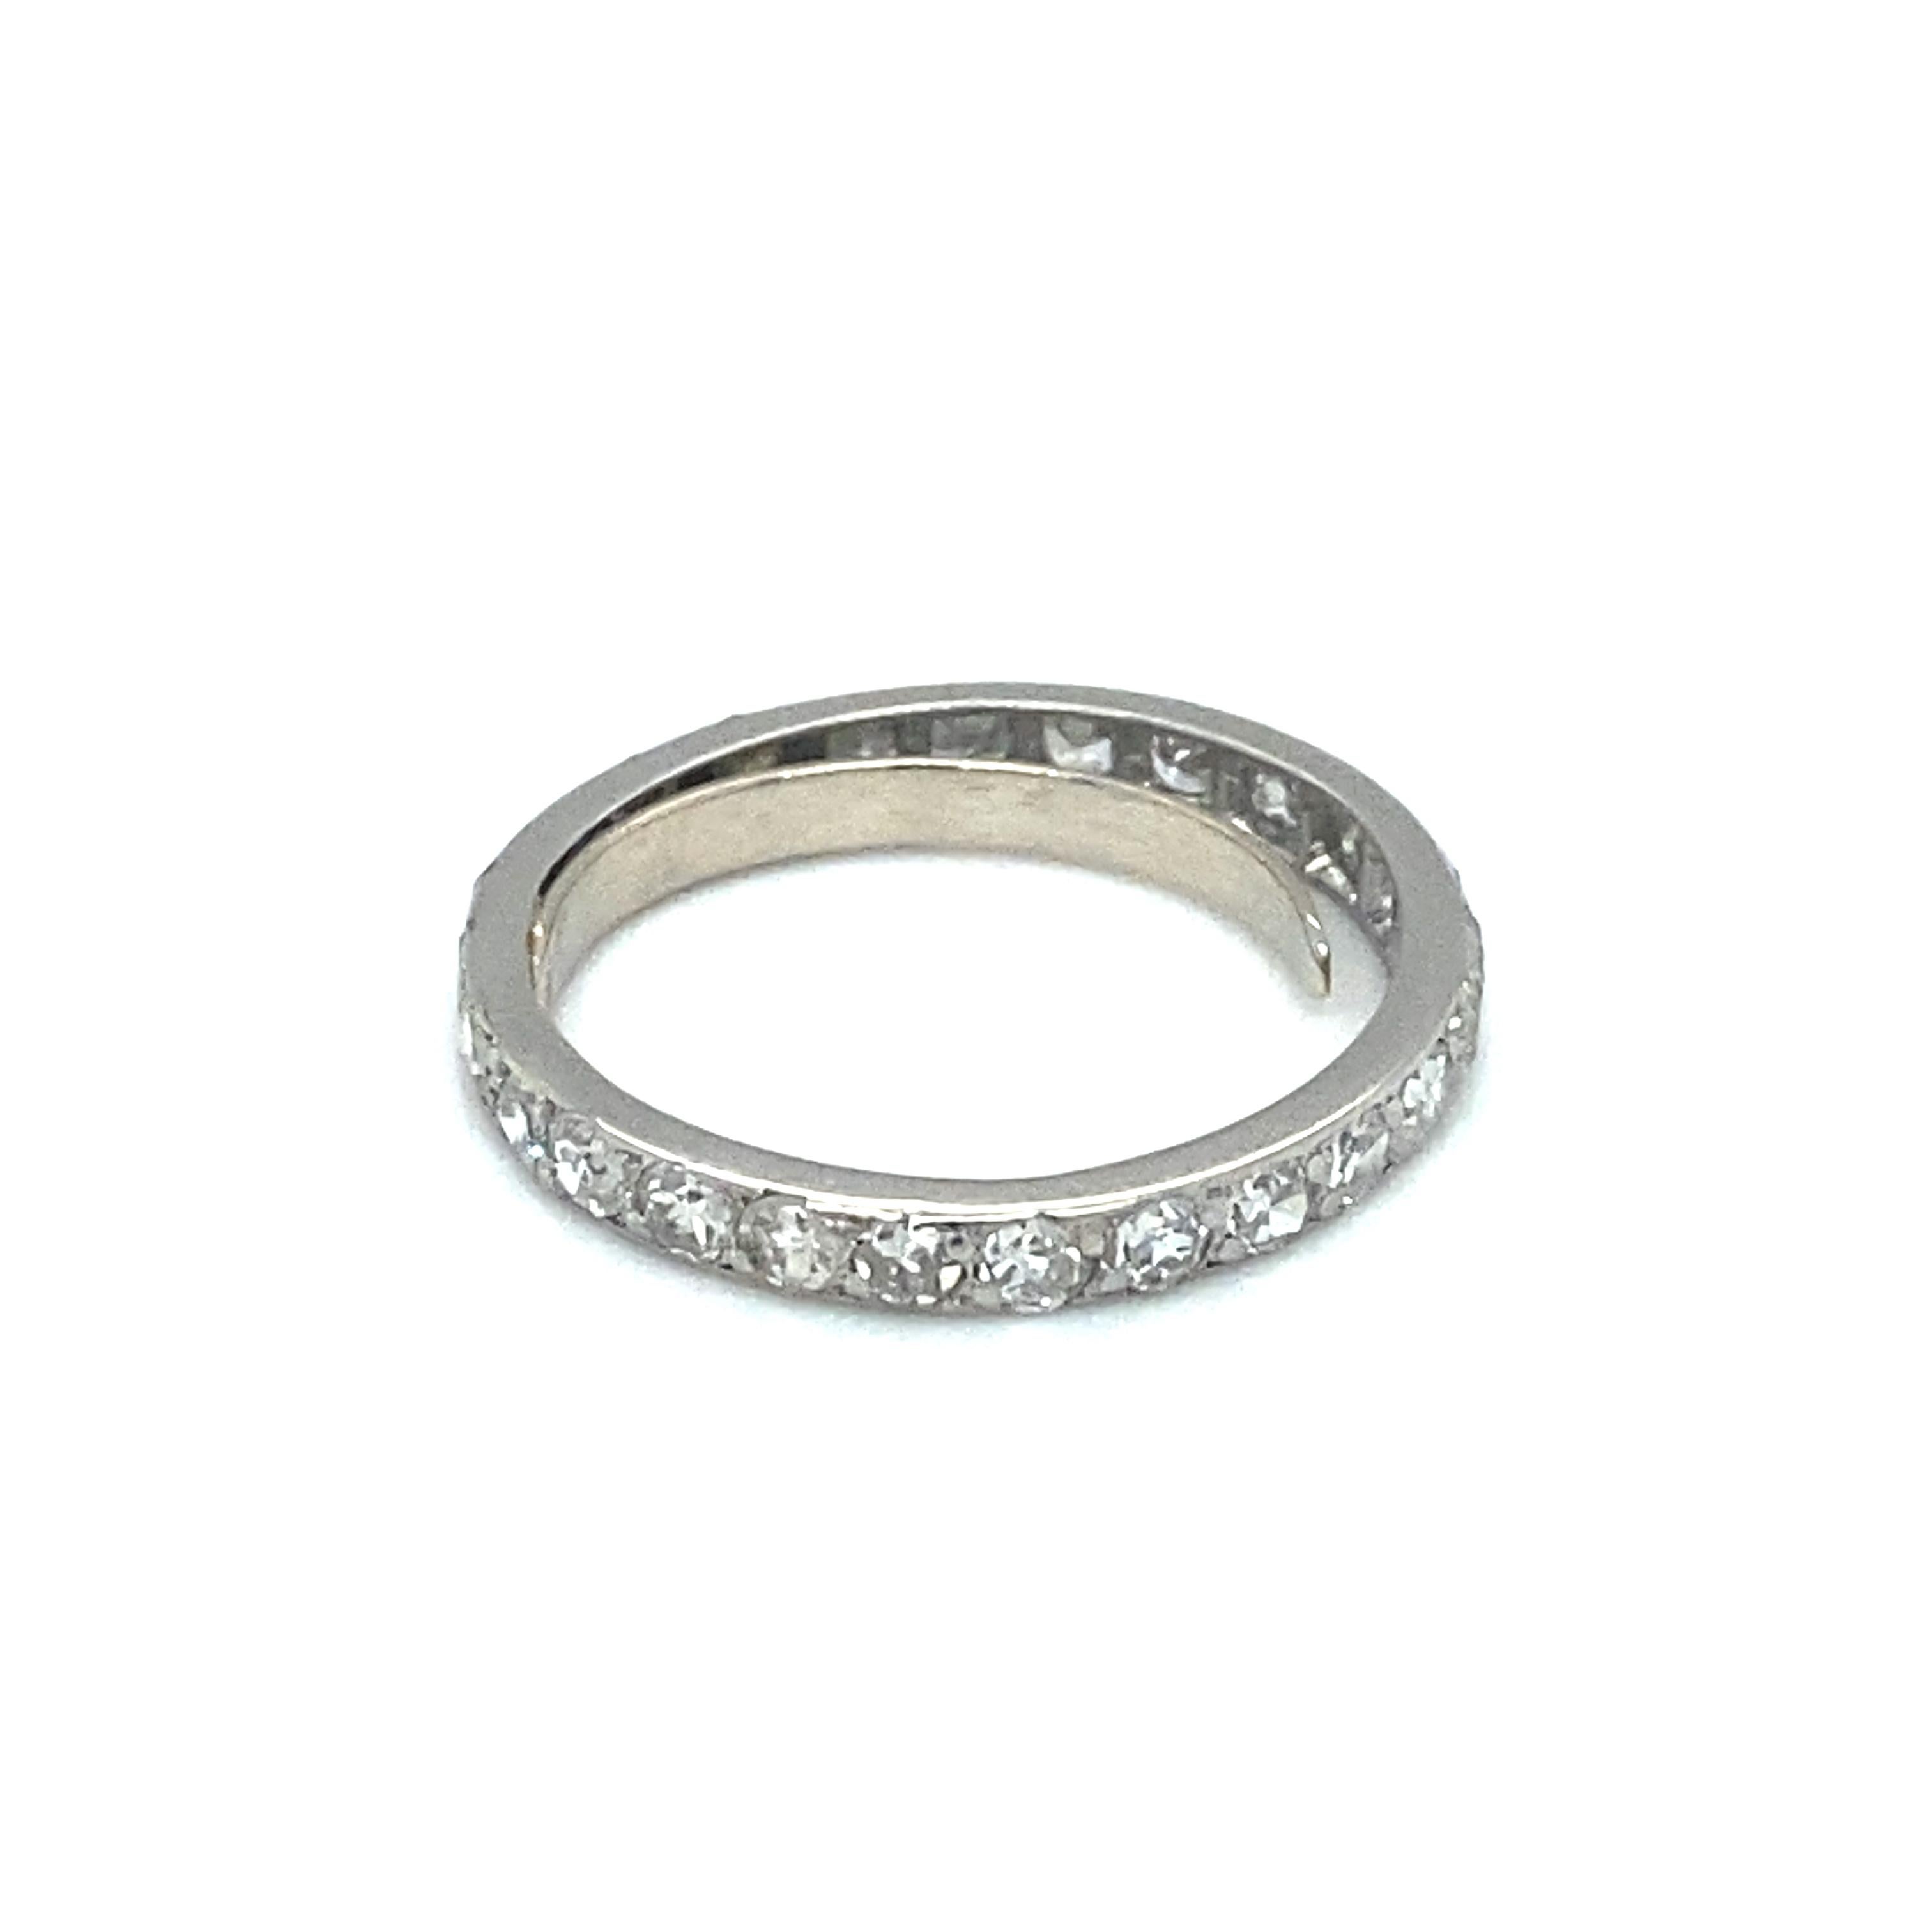 Item Details: This ring features sparkling single cut diamonds all around that total 1 carat. It dates back to the 1920s, art deco era and has a timeless eternity band design. There is a sizing spring insert that can be removed upon request.